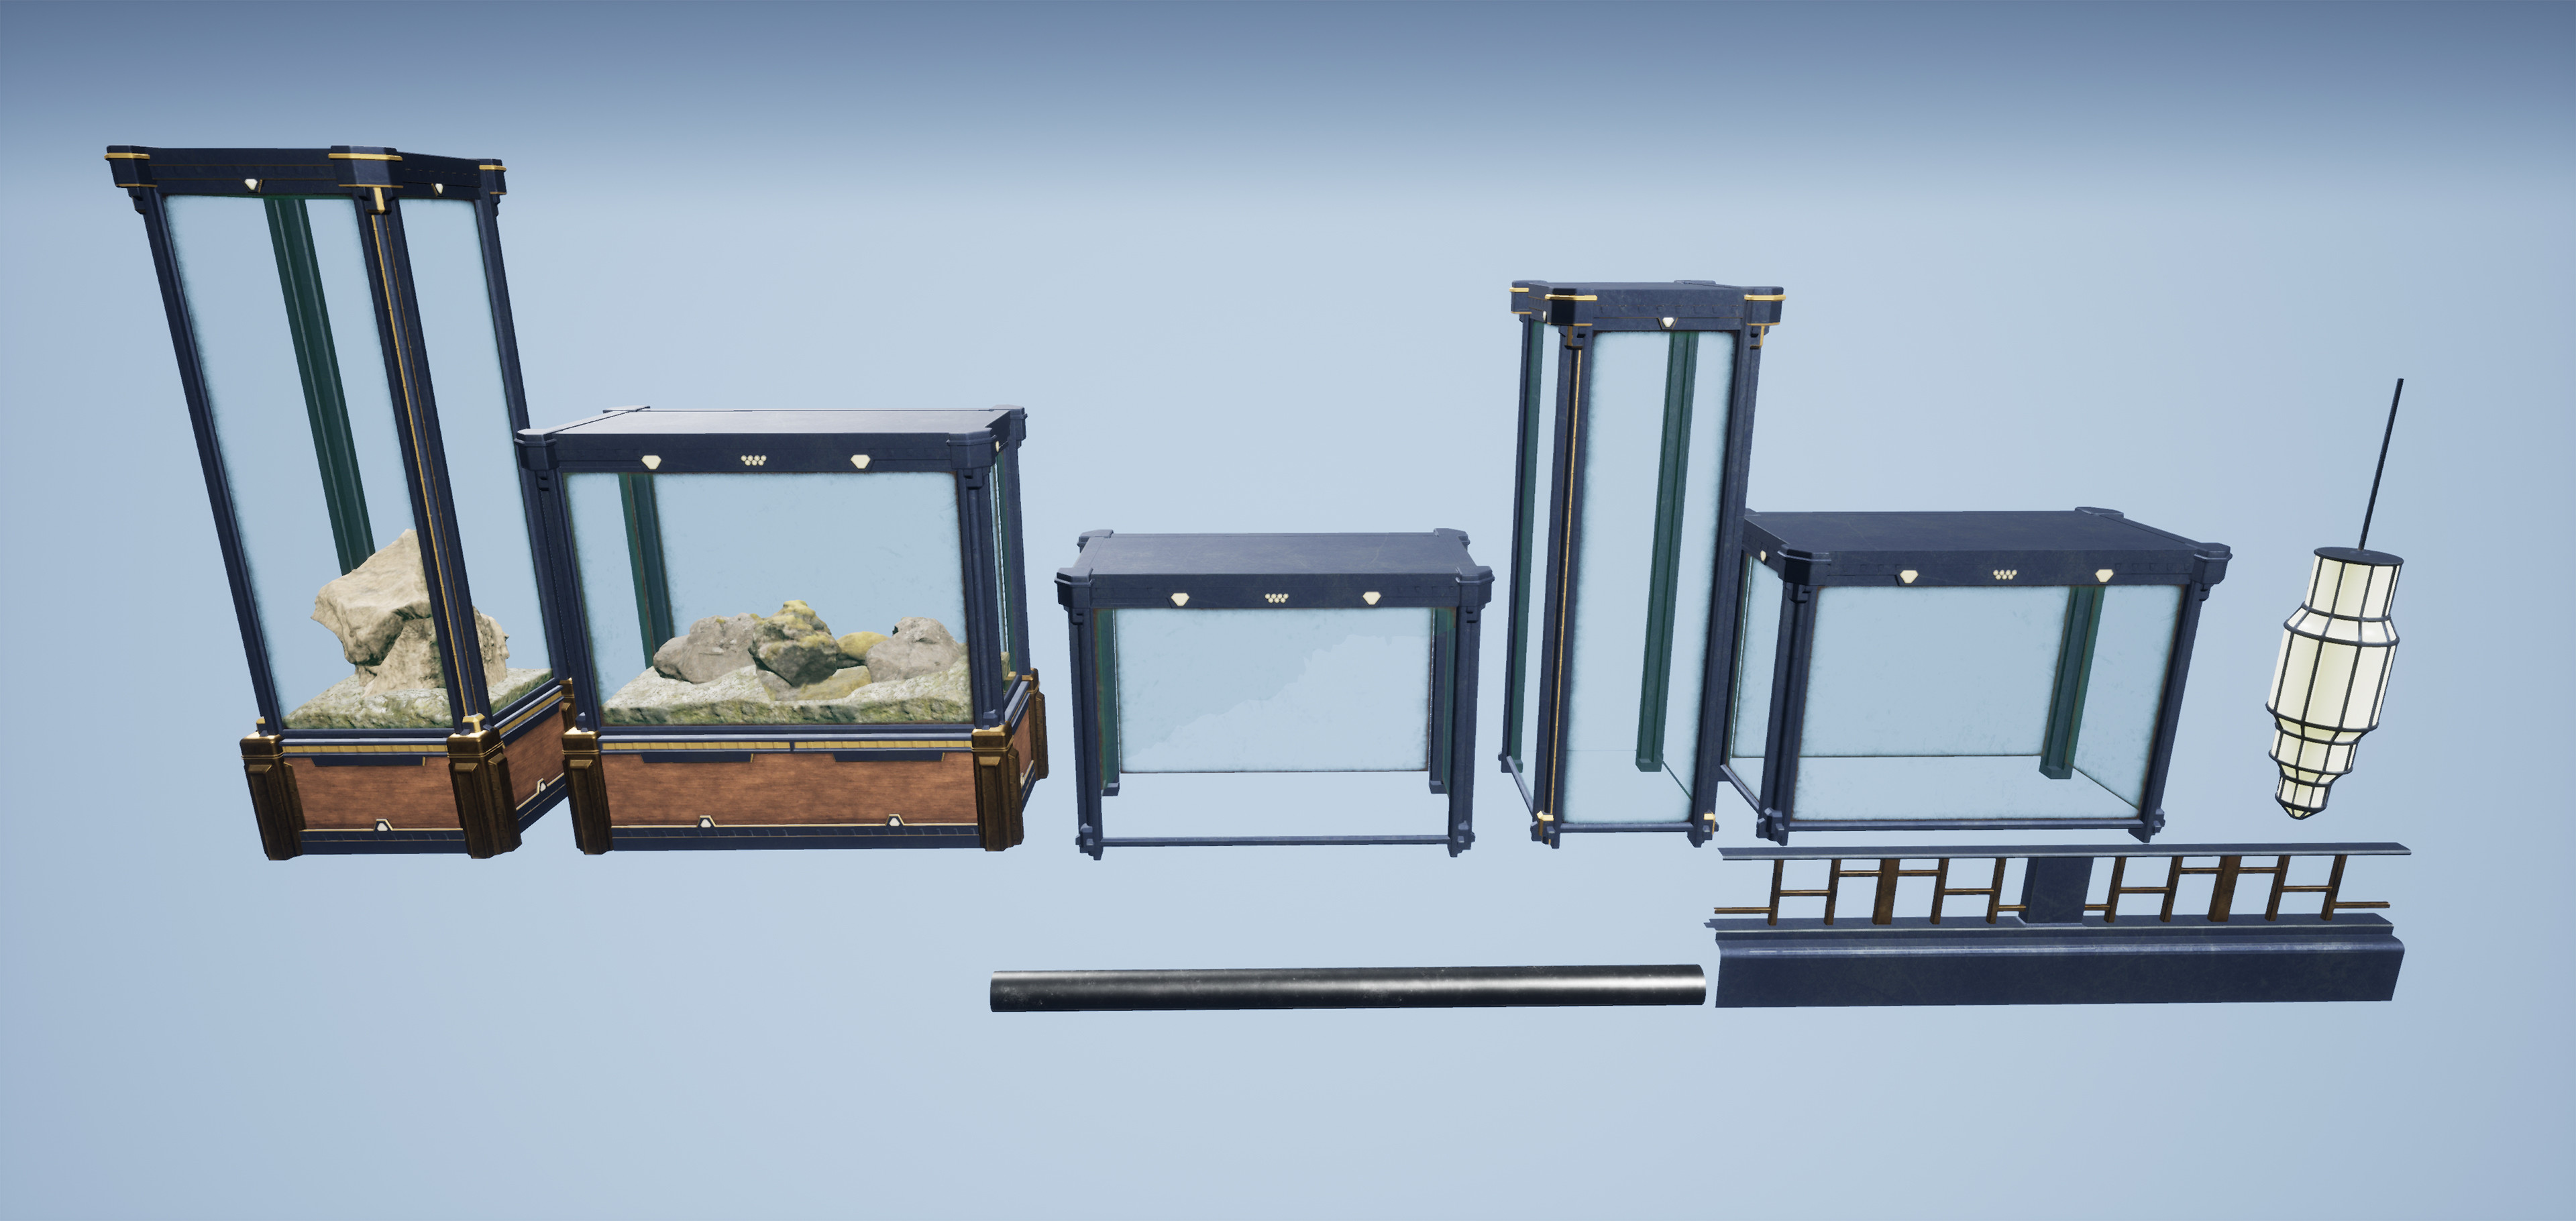 A few other modular assets utilized in the scene.